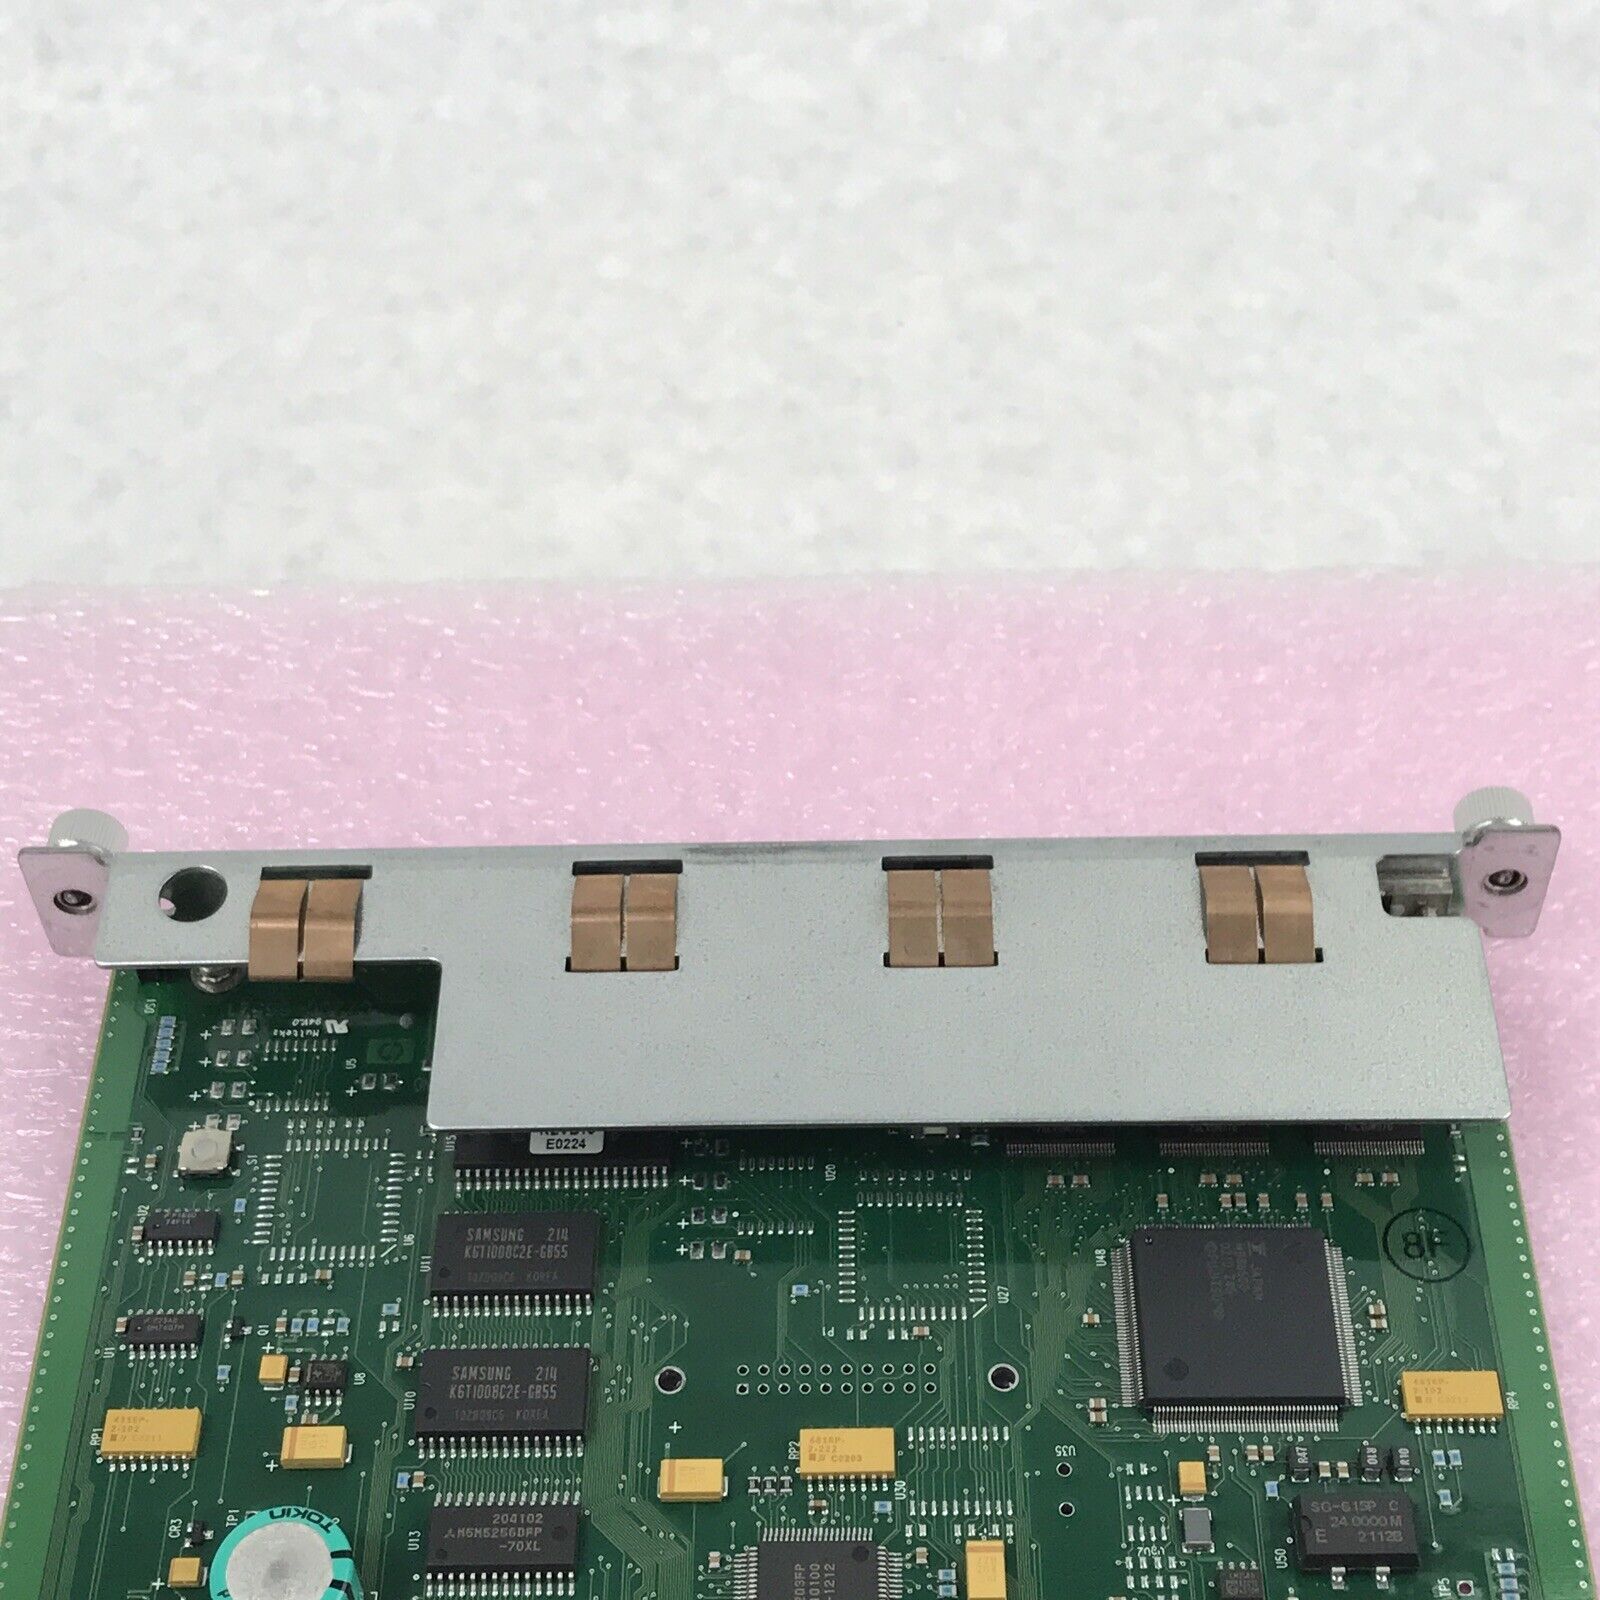 HP C7200-66521 Library Controller Card